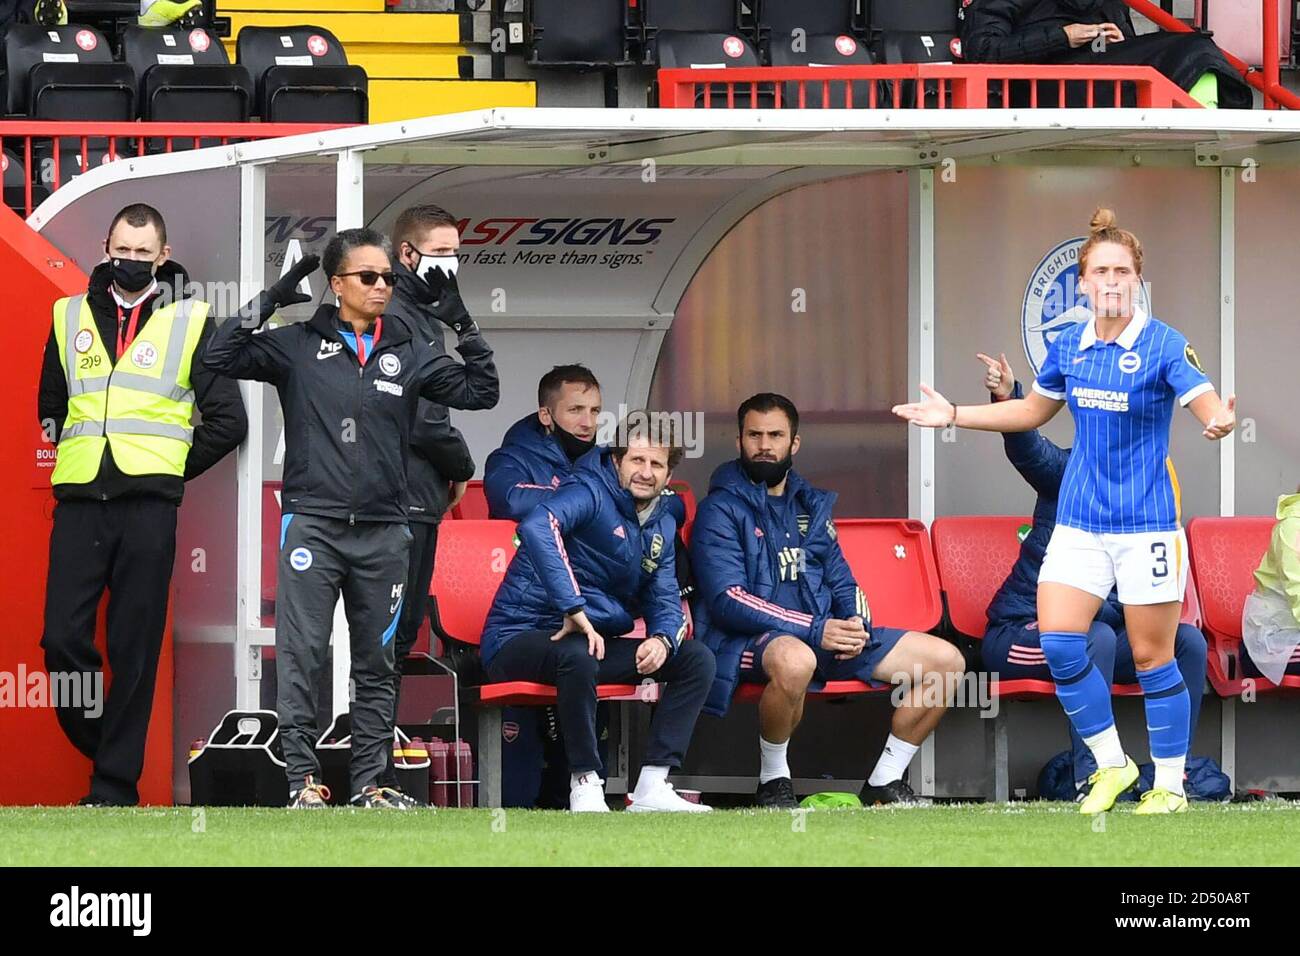 Crawley, UK. 11th Oct, 2020. Brighton and Hove Albion Manager Hope Powell shows her dismay at a decision against her team during the FA Women's Super League match between Brighton & Hove Albion Women and Arsenal LFC at The People's Pension Stadium on October 11th 2020 in Crawley, United Kingdom. (Photo by Jeff Mood/phcimages.com) Credit: PHC Images/Alamy Live News Stock Photo